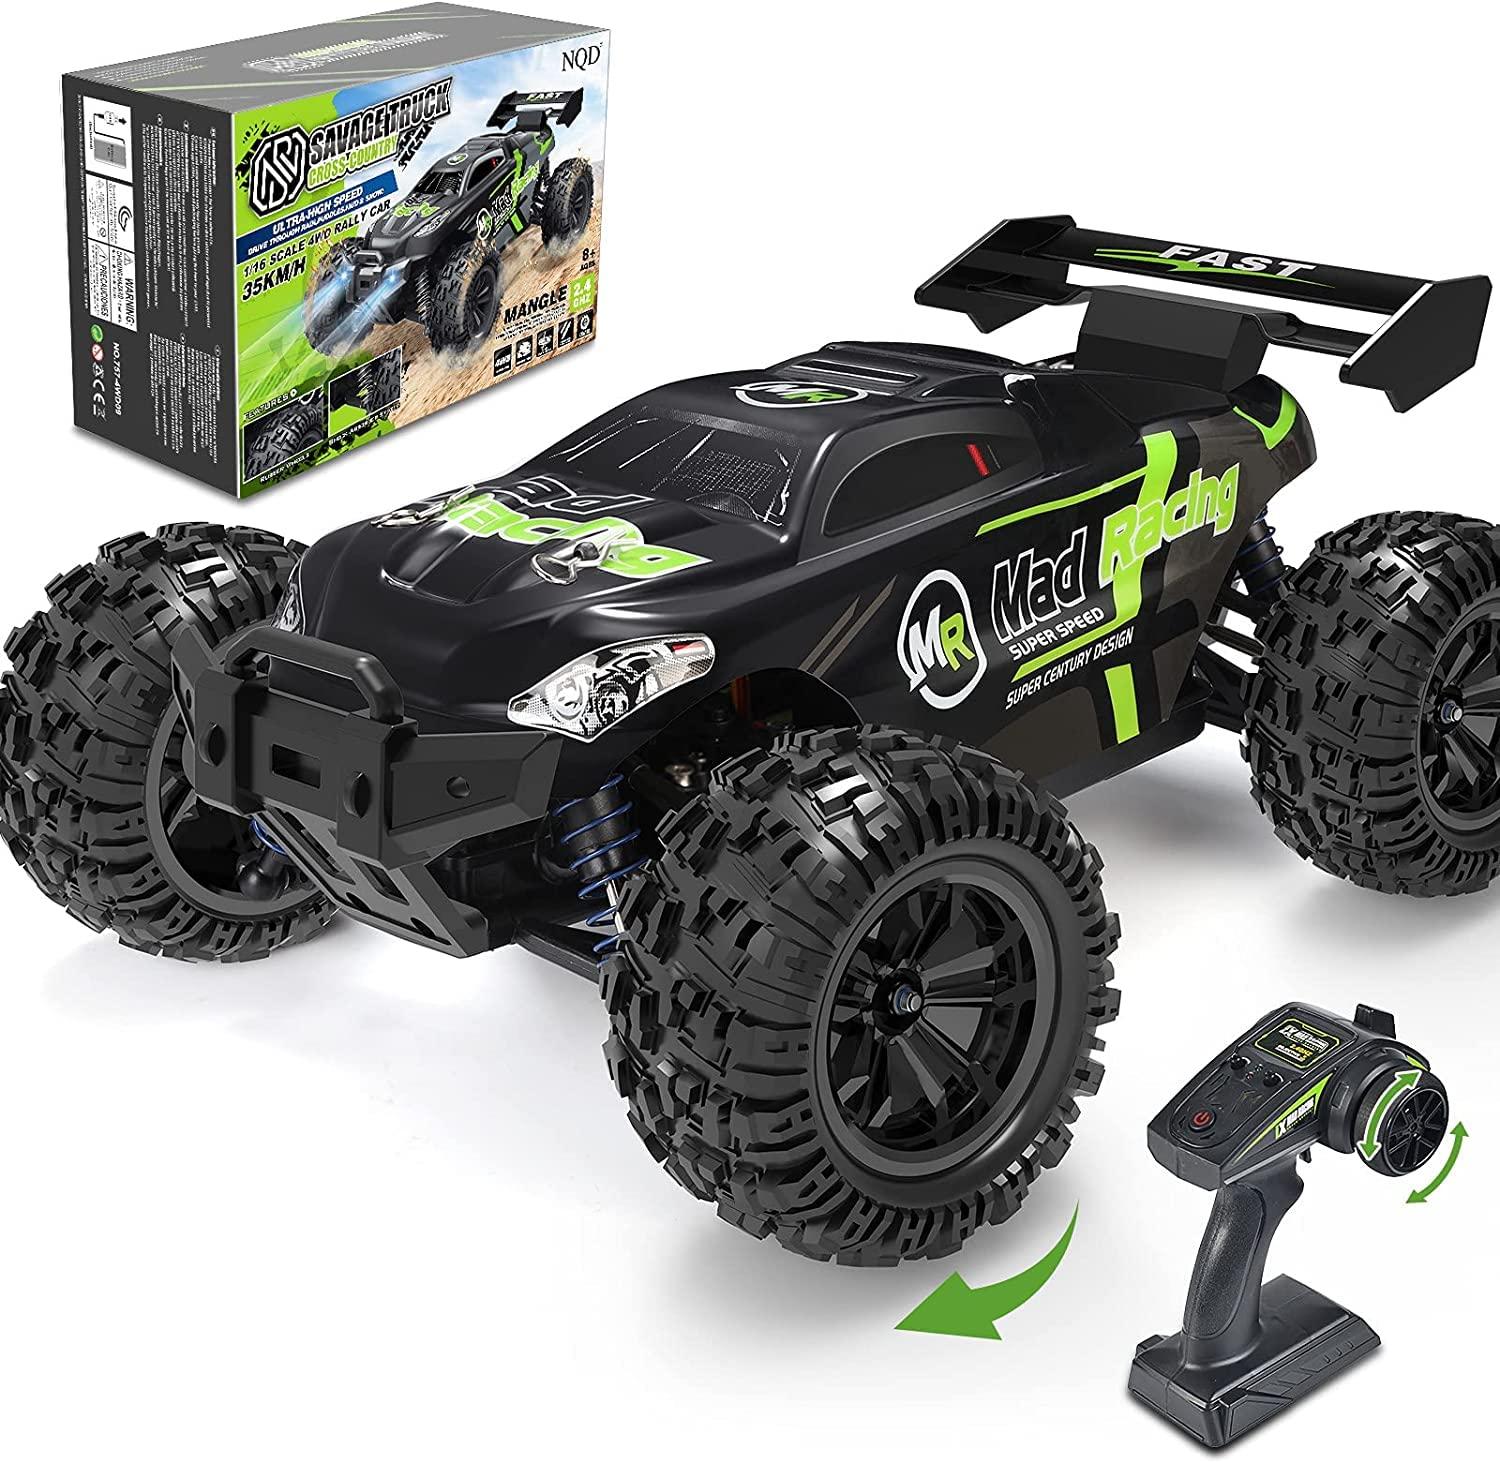 Fastest Remote Car: Pre-order now and get the fastest remote control car in select stores and regions!